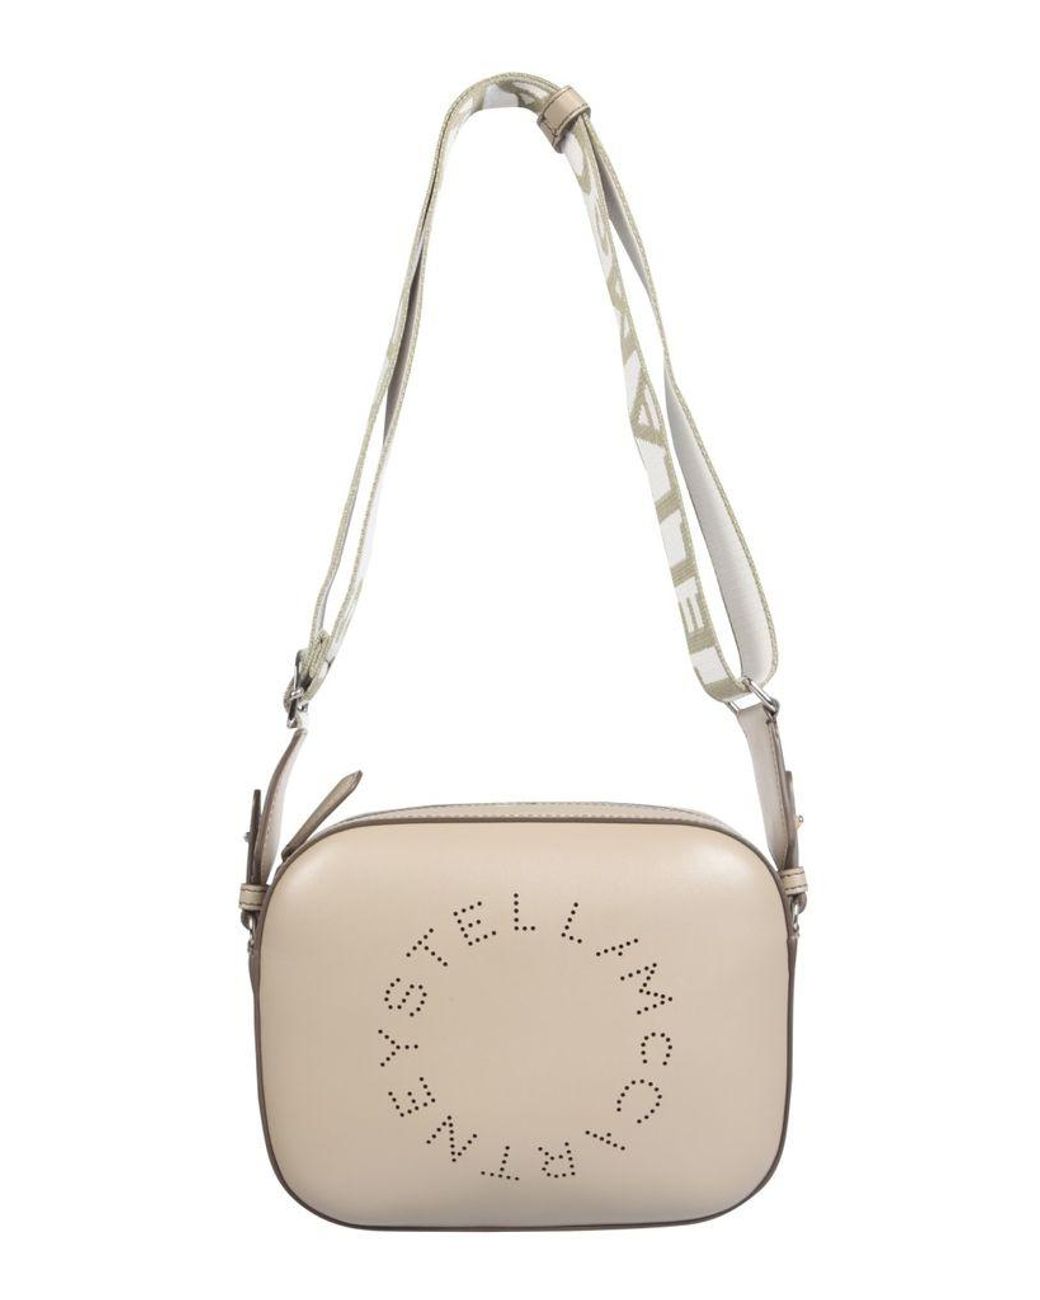 Stella McCartney Synthetic Mini Camera Bag in Natural - Lyst